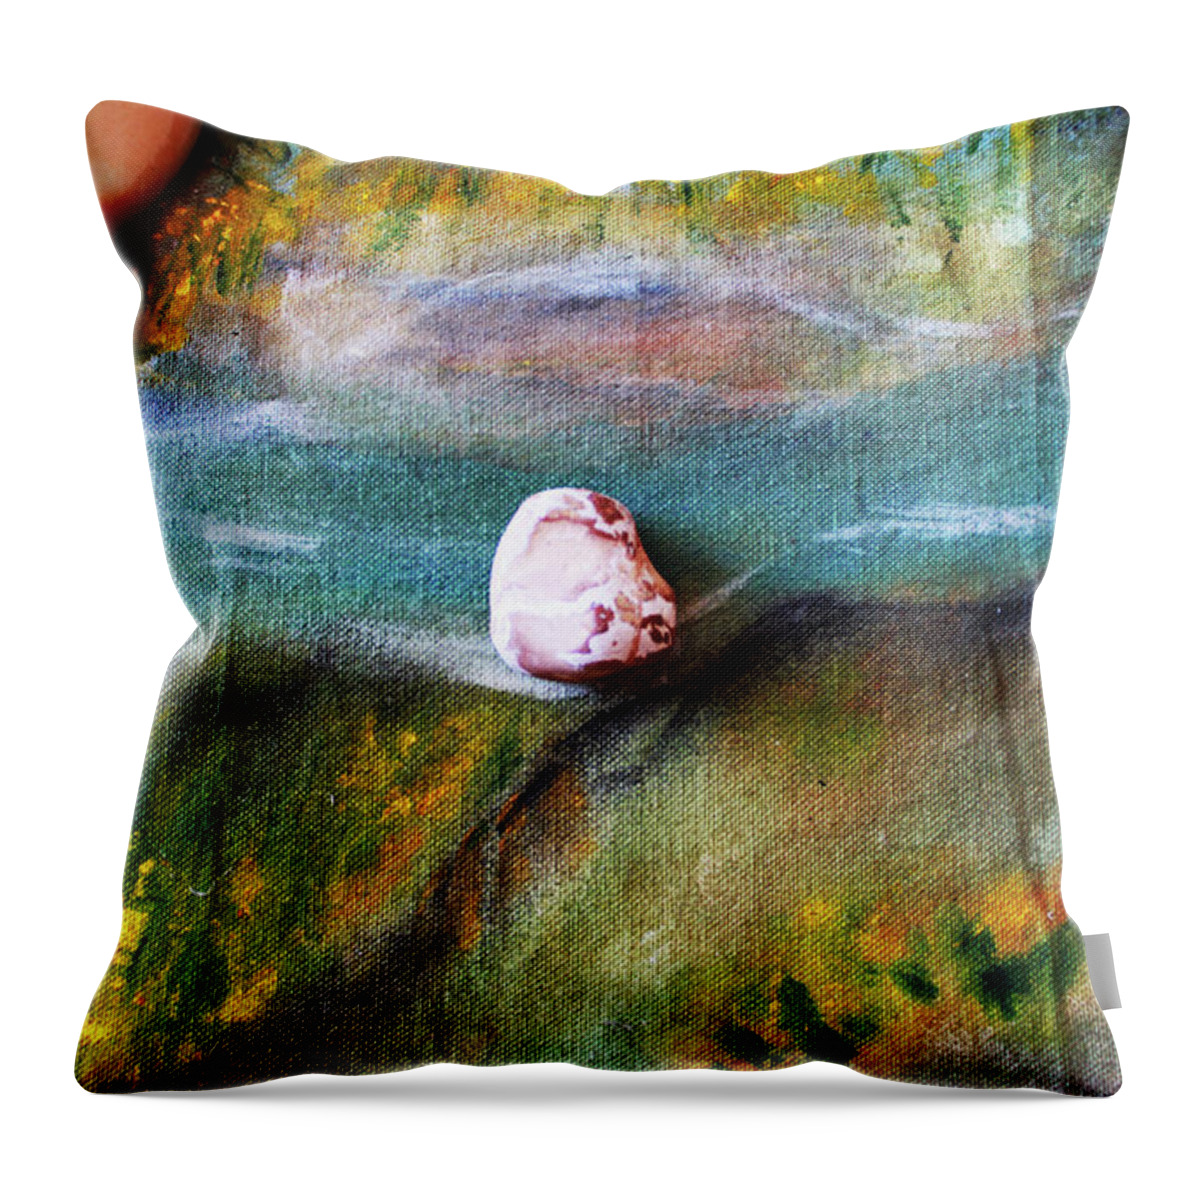 Augusta Stylianou Throw Pillow featuring the digital art Pebbles at the stream by Augusta Stylianou